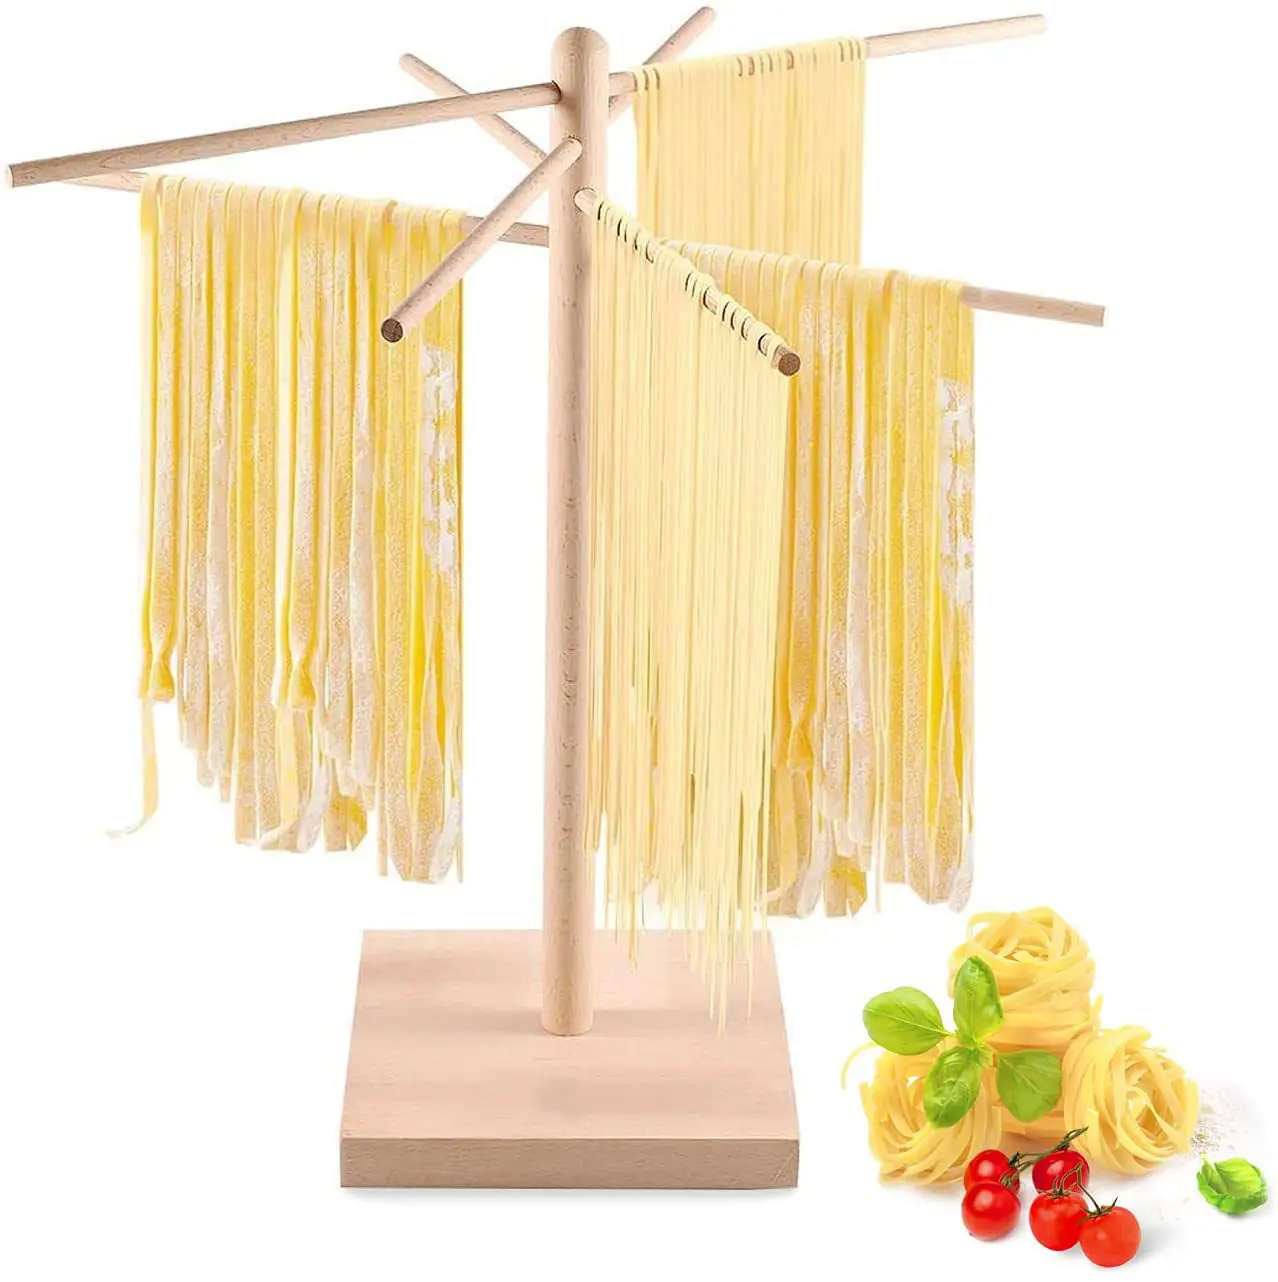 Natural Beech Wood Foldable Noodles Stand Spaghetti Hanging Dryer Rack for Home Use Storage Pasta, Spaghetti, Noodle